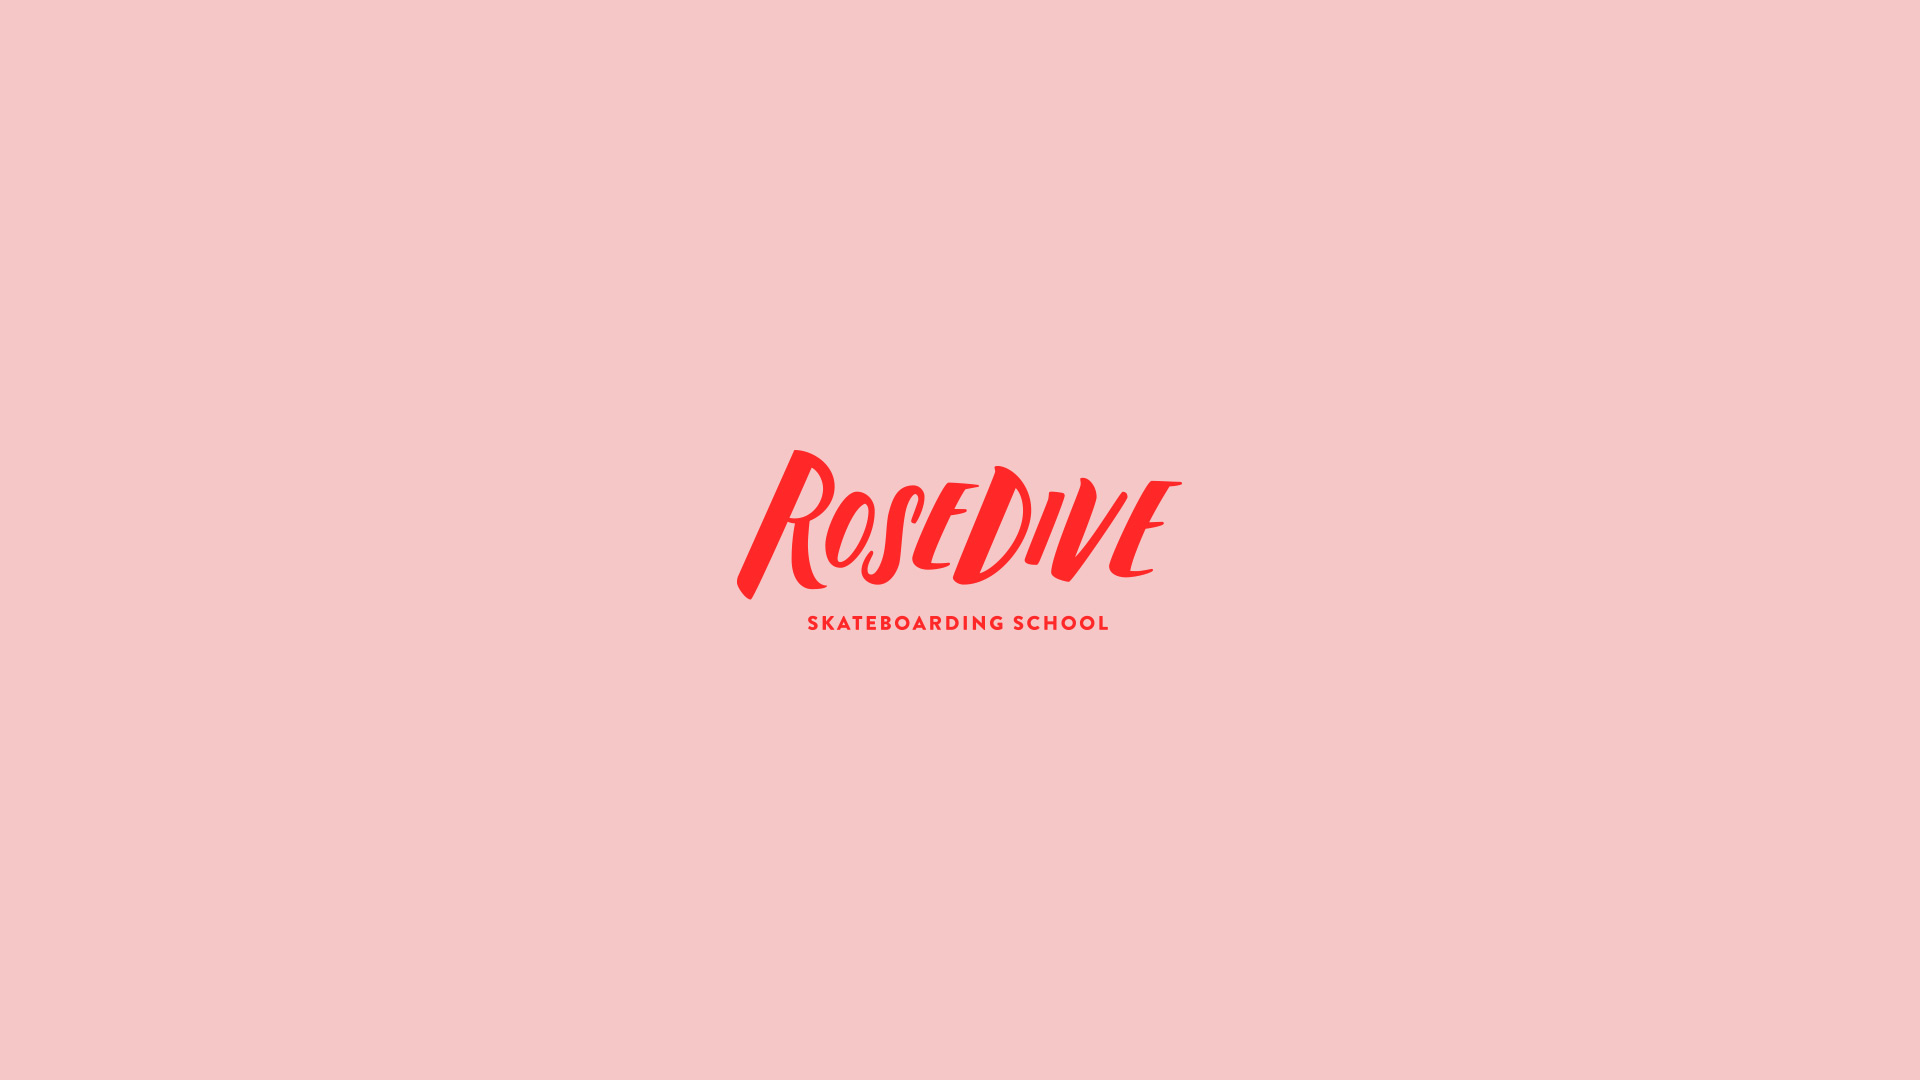  Rosedive was created because I wanted to empower girls during a vulnerable point in their lives. I decided to create a skateboarding school because skateboarding is an incredibly male-dominated sport, and it felt like a great space to try to disrupt